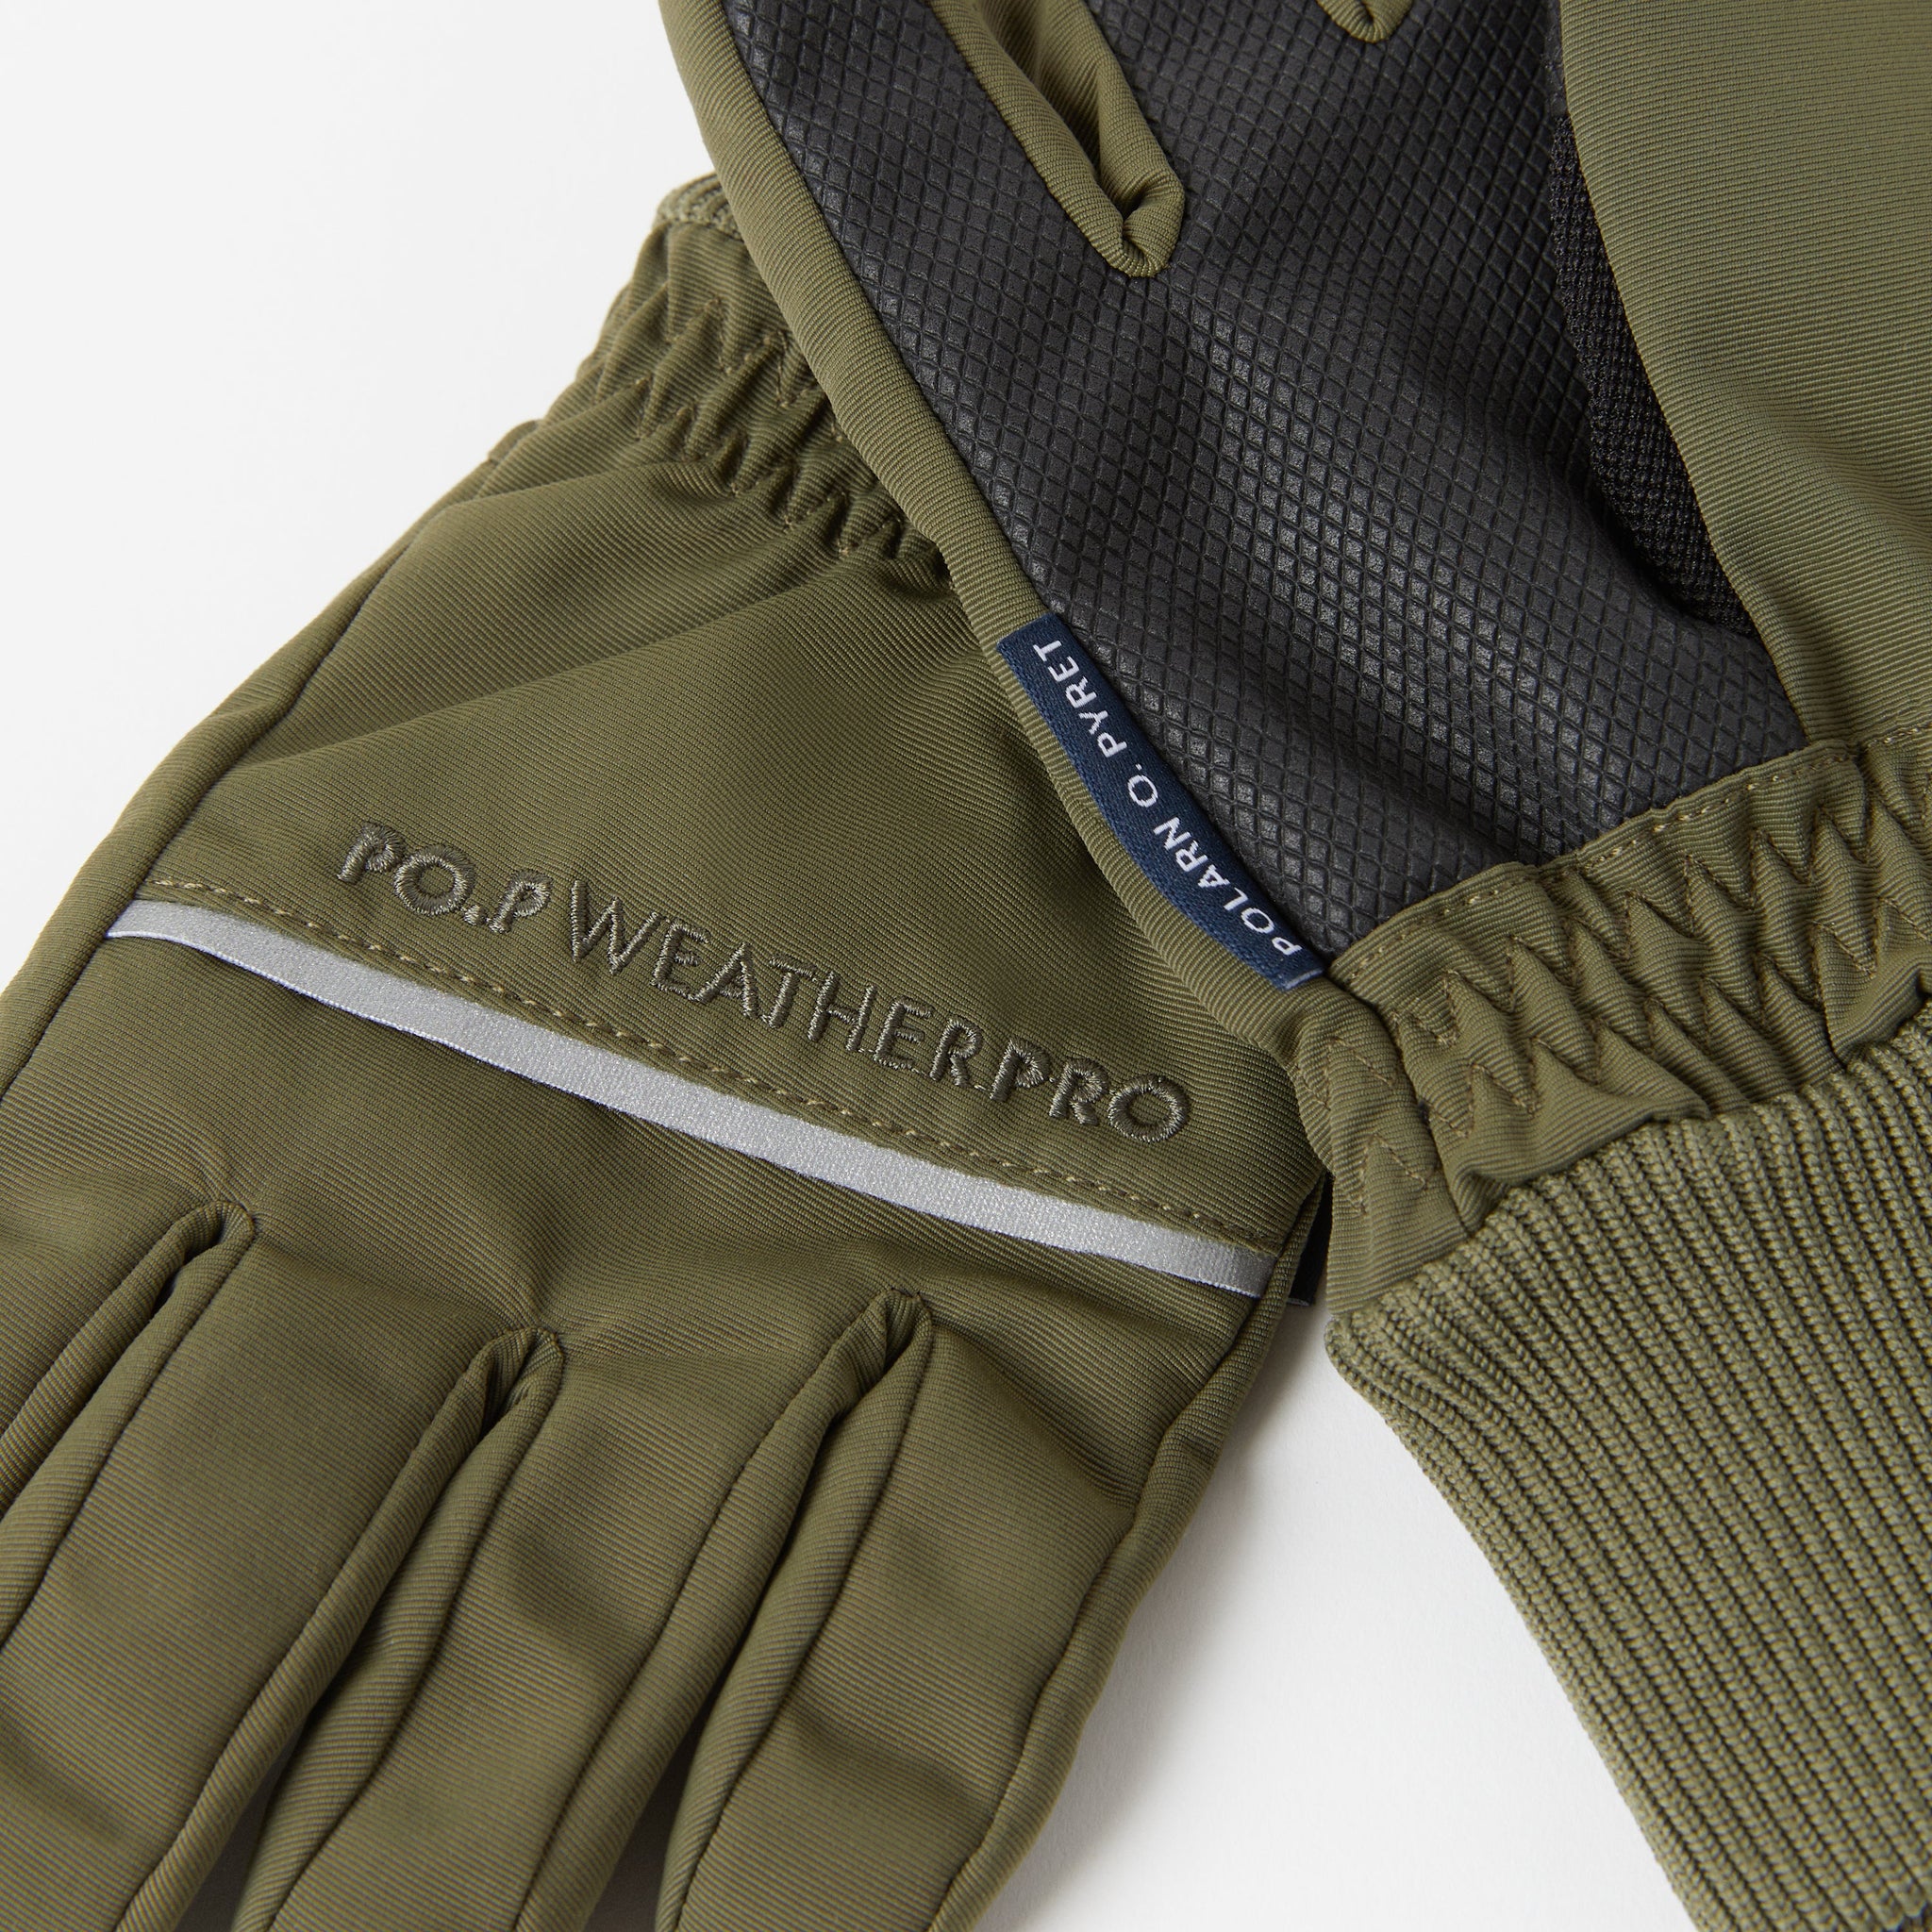 Green Kids Waterproof Gloves from the Polarn O. Pyret kidswear collection. Quality kids clothing made to last.